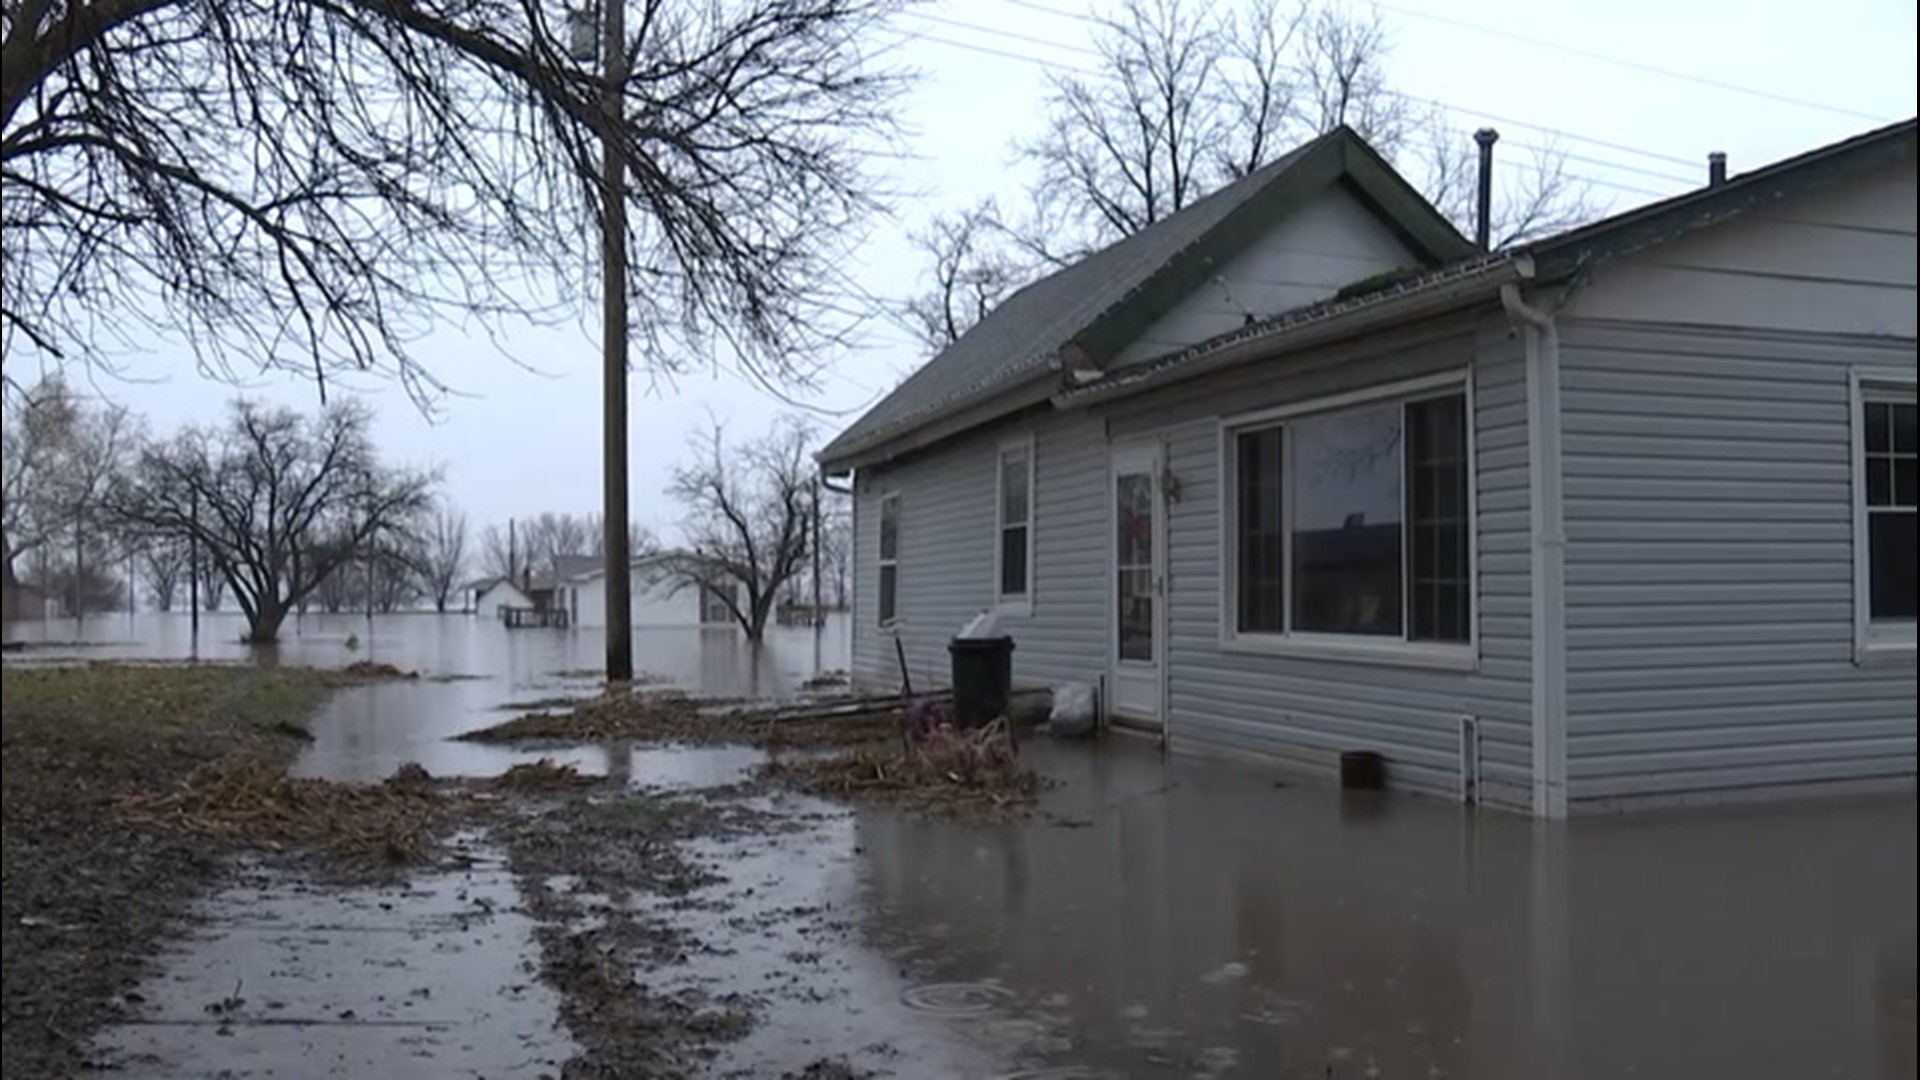 After devastating flooding impacted over 14-million people in the Midwest during 2019, many are concerned similar conditions will prevail as we approach spring 2020.